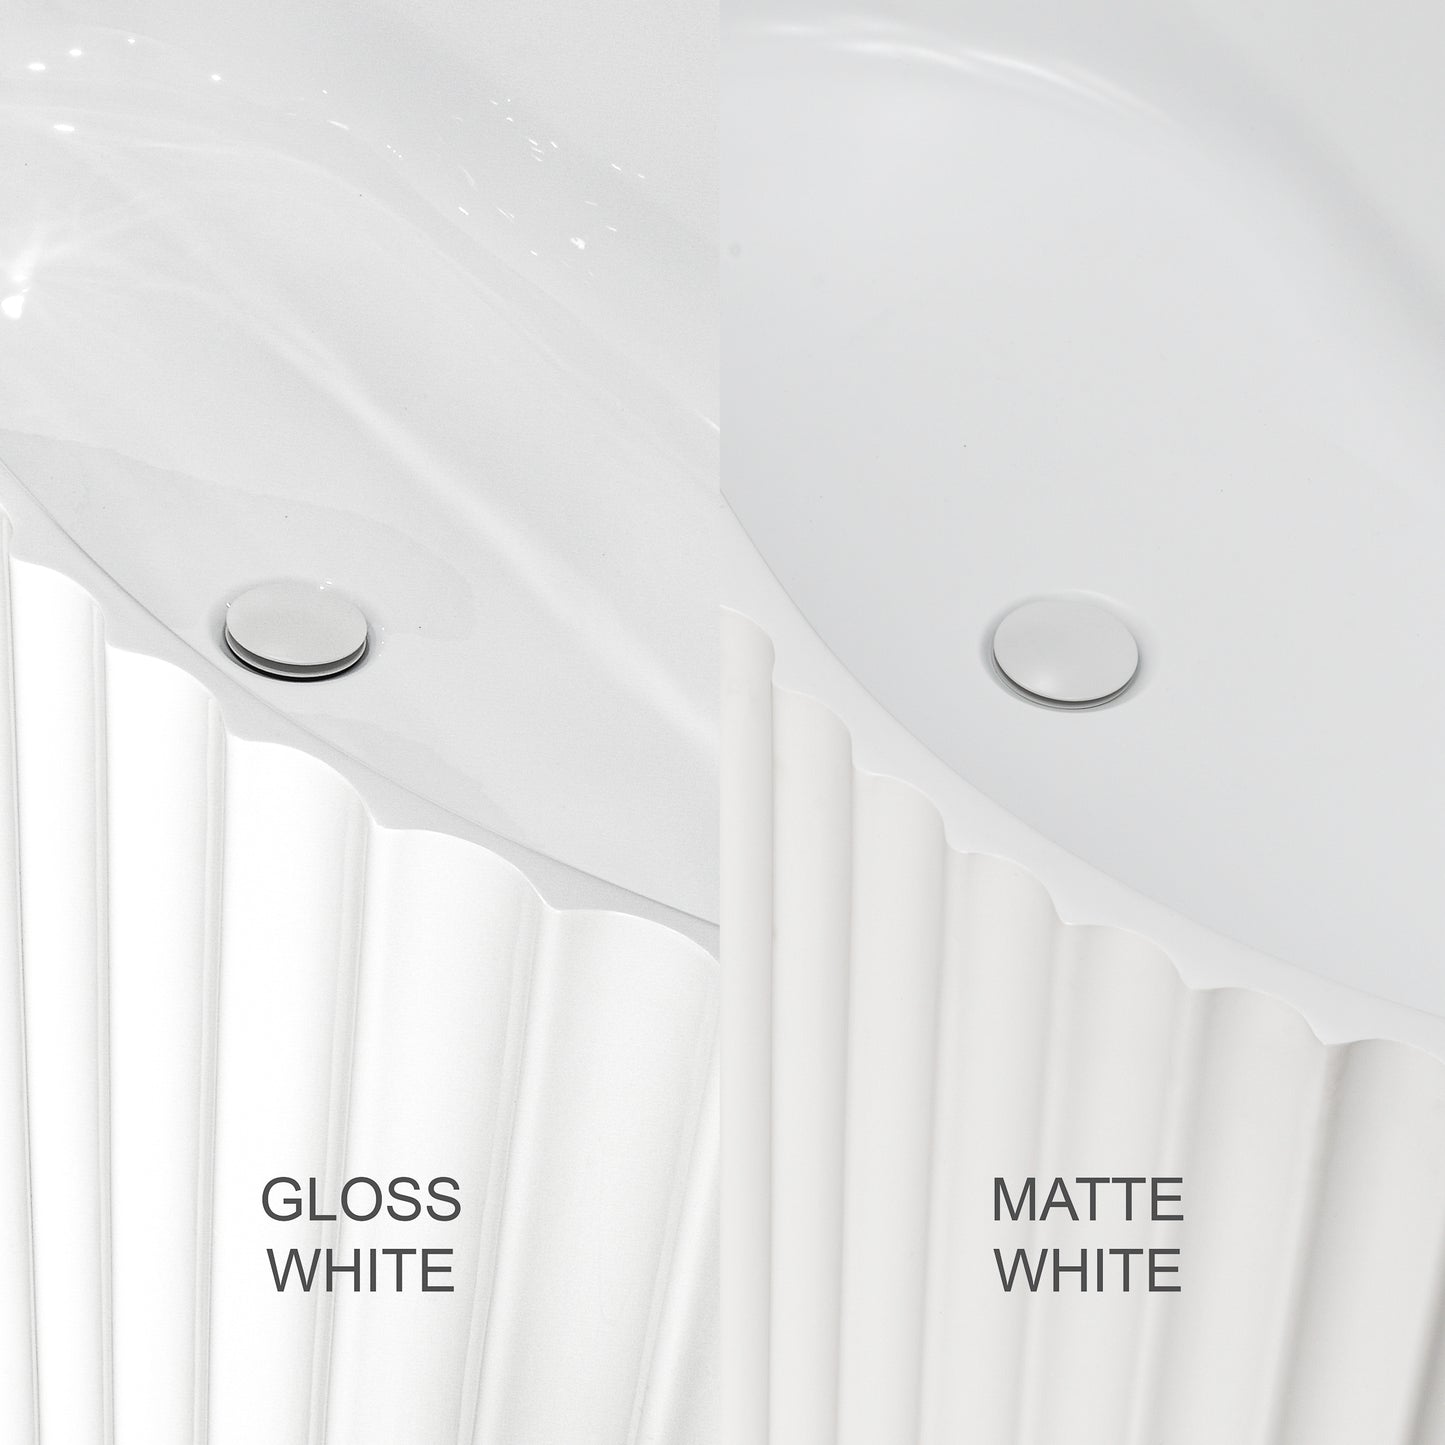 Agora Groove 1500mm Fluted Oval Freestanding Bath, Matte White